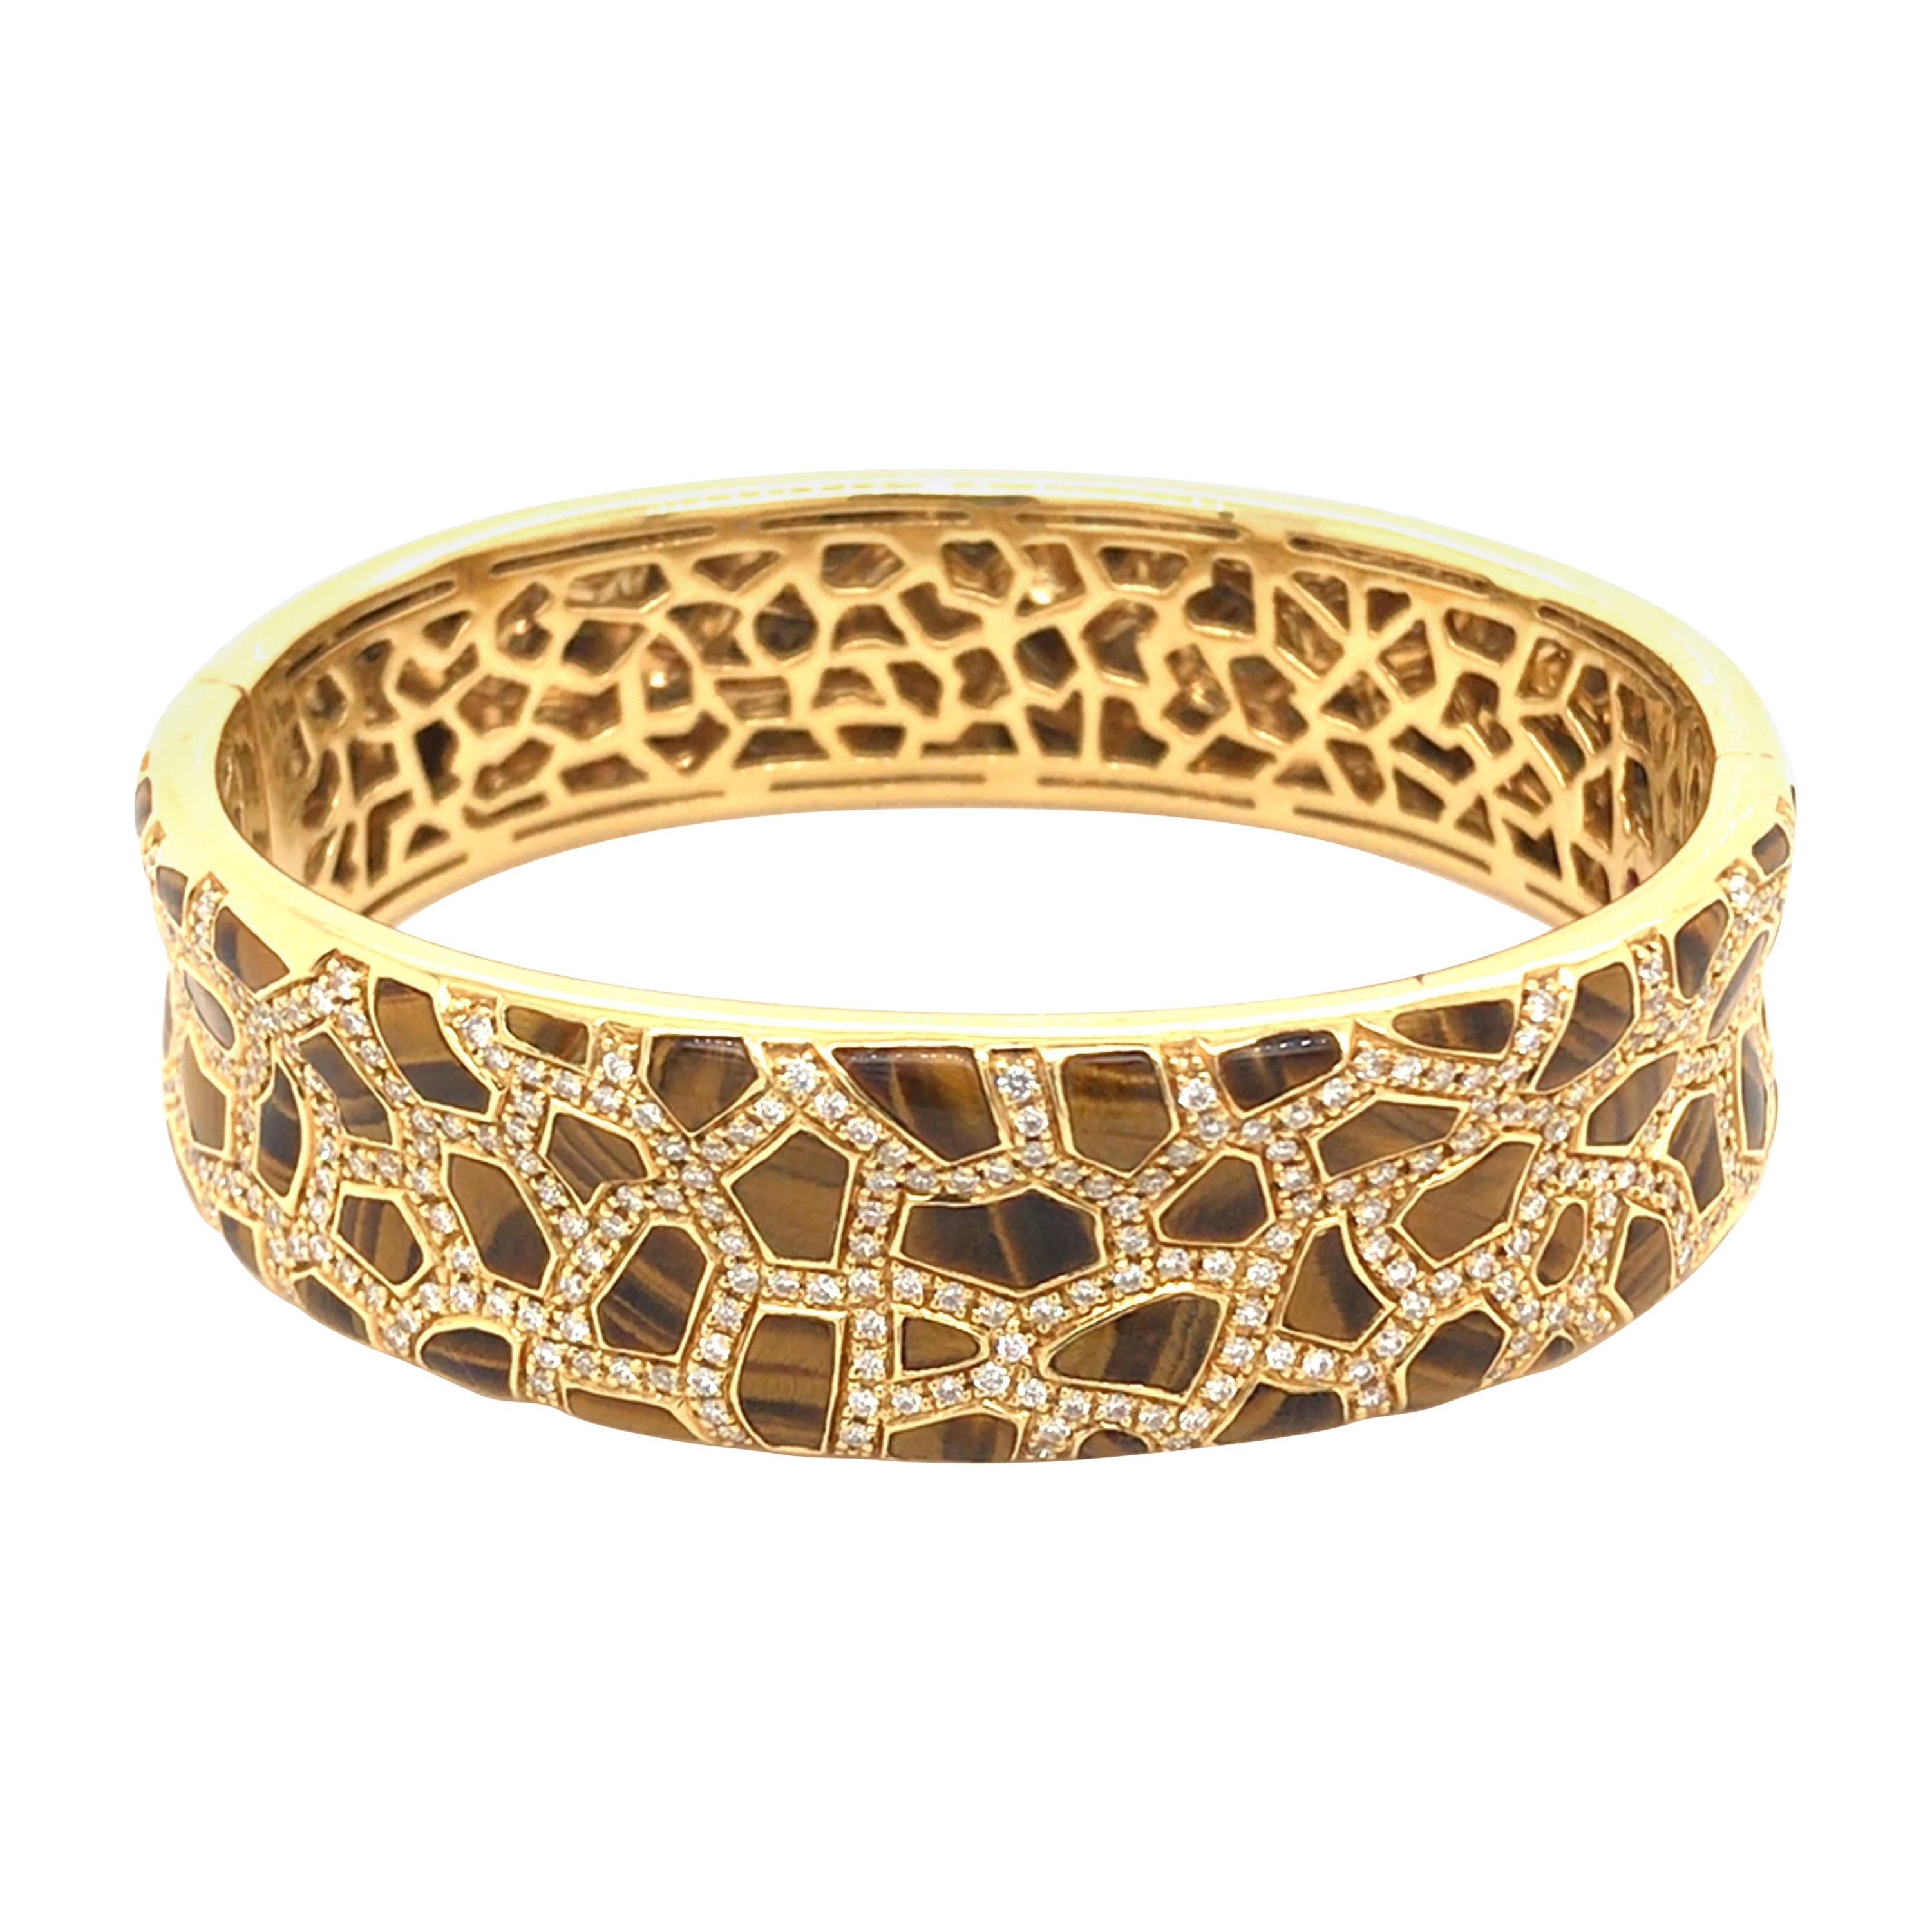 Roberto Coin Tigers Eye and Diamond Bracelet from the Animalier Collection